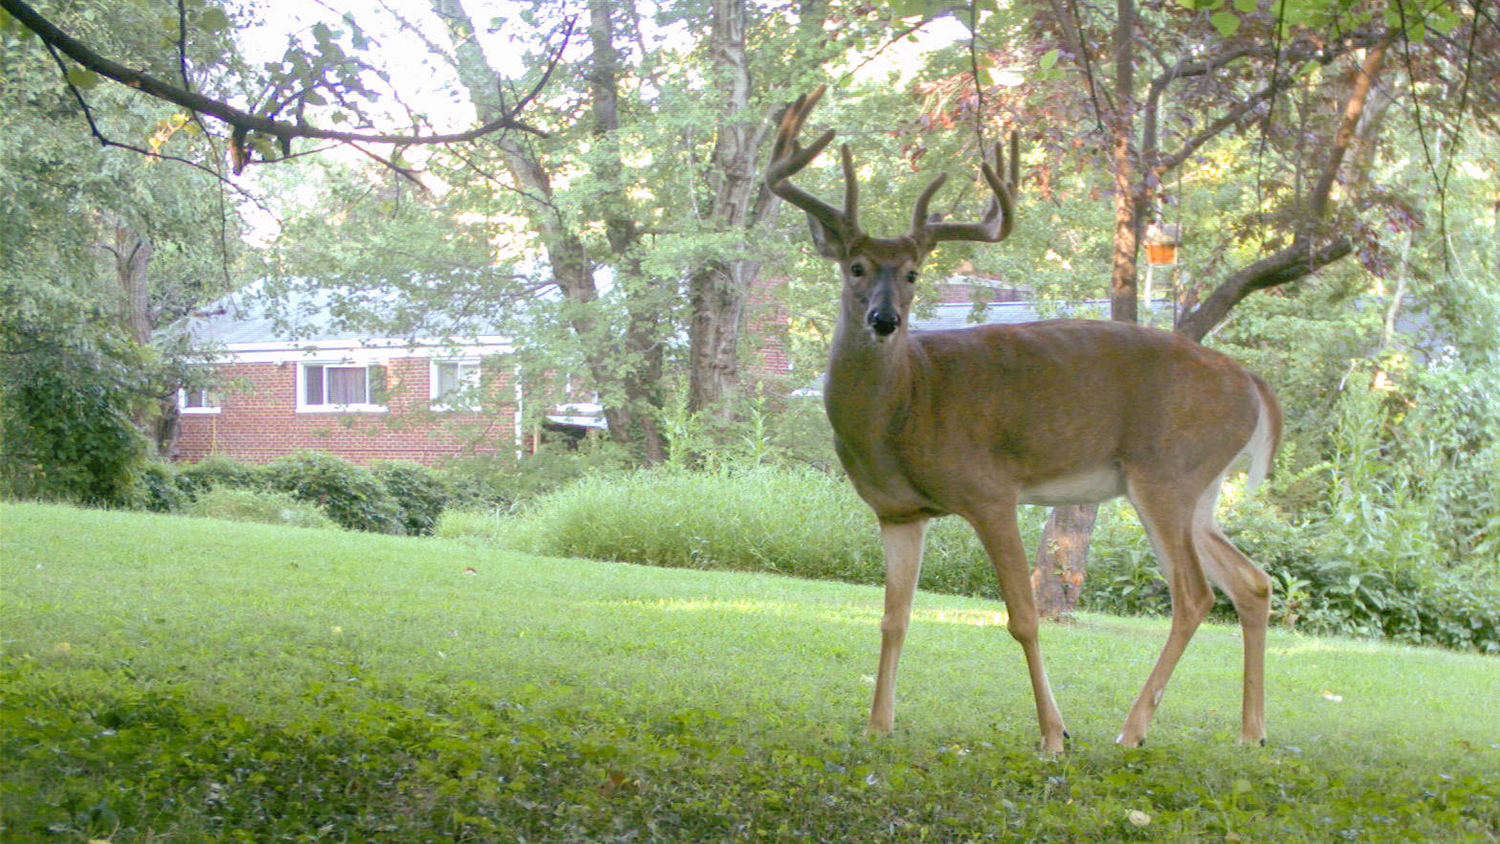 Photo of a deer close to a suburban house.